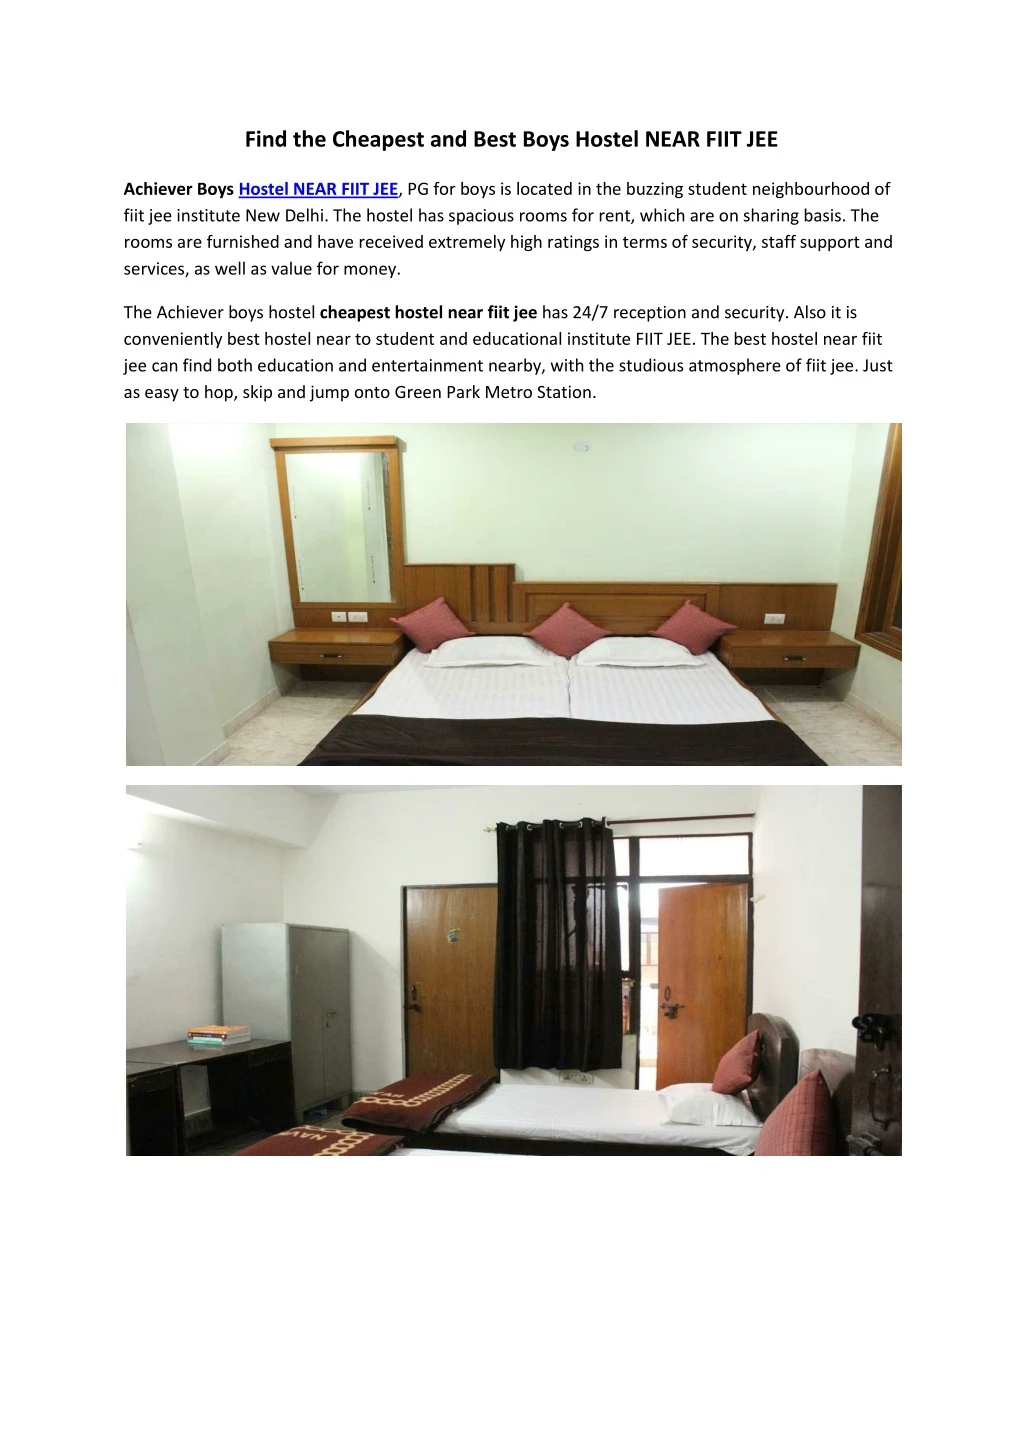 find the cheapest and best boys hostel near fiit